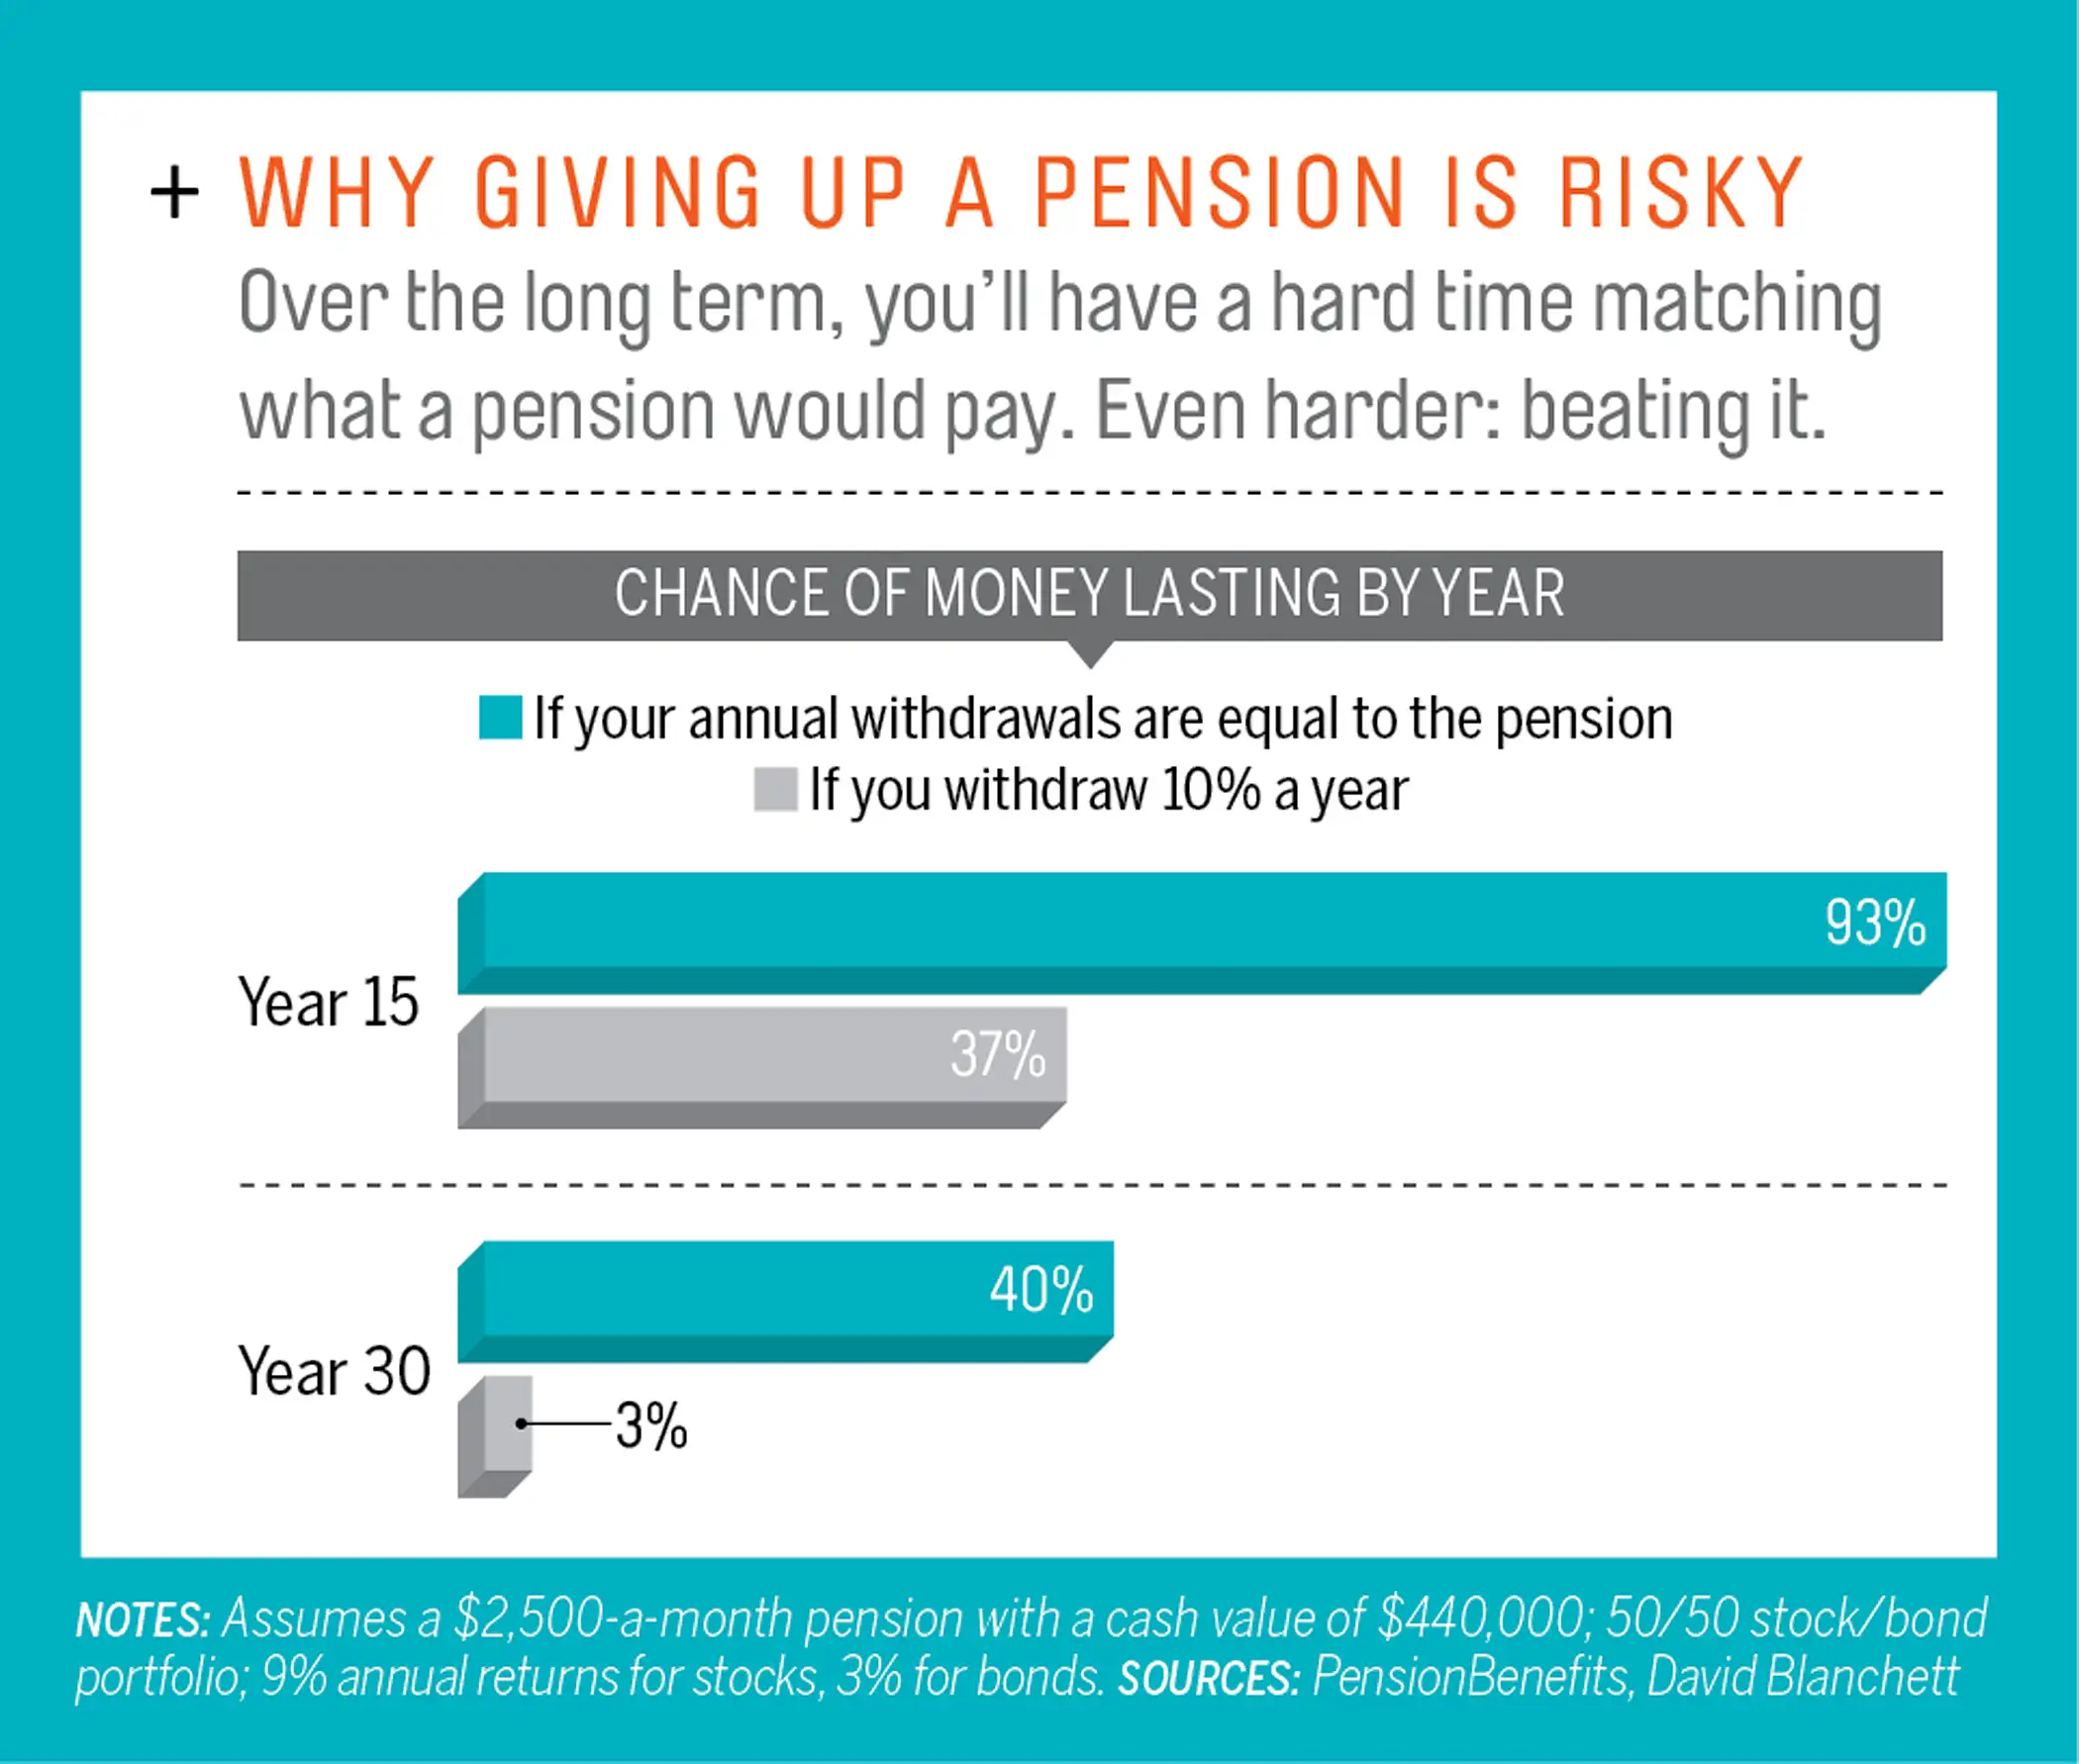 Why Giving up a Pension is Risky